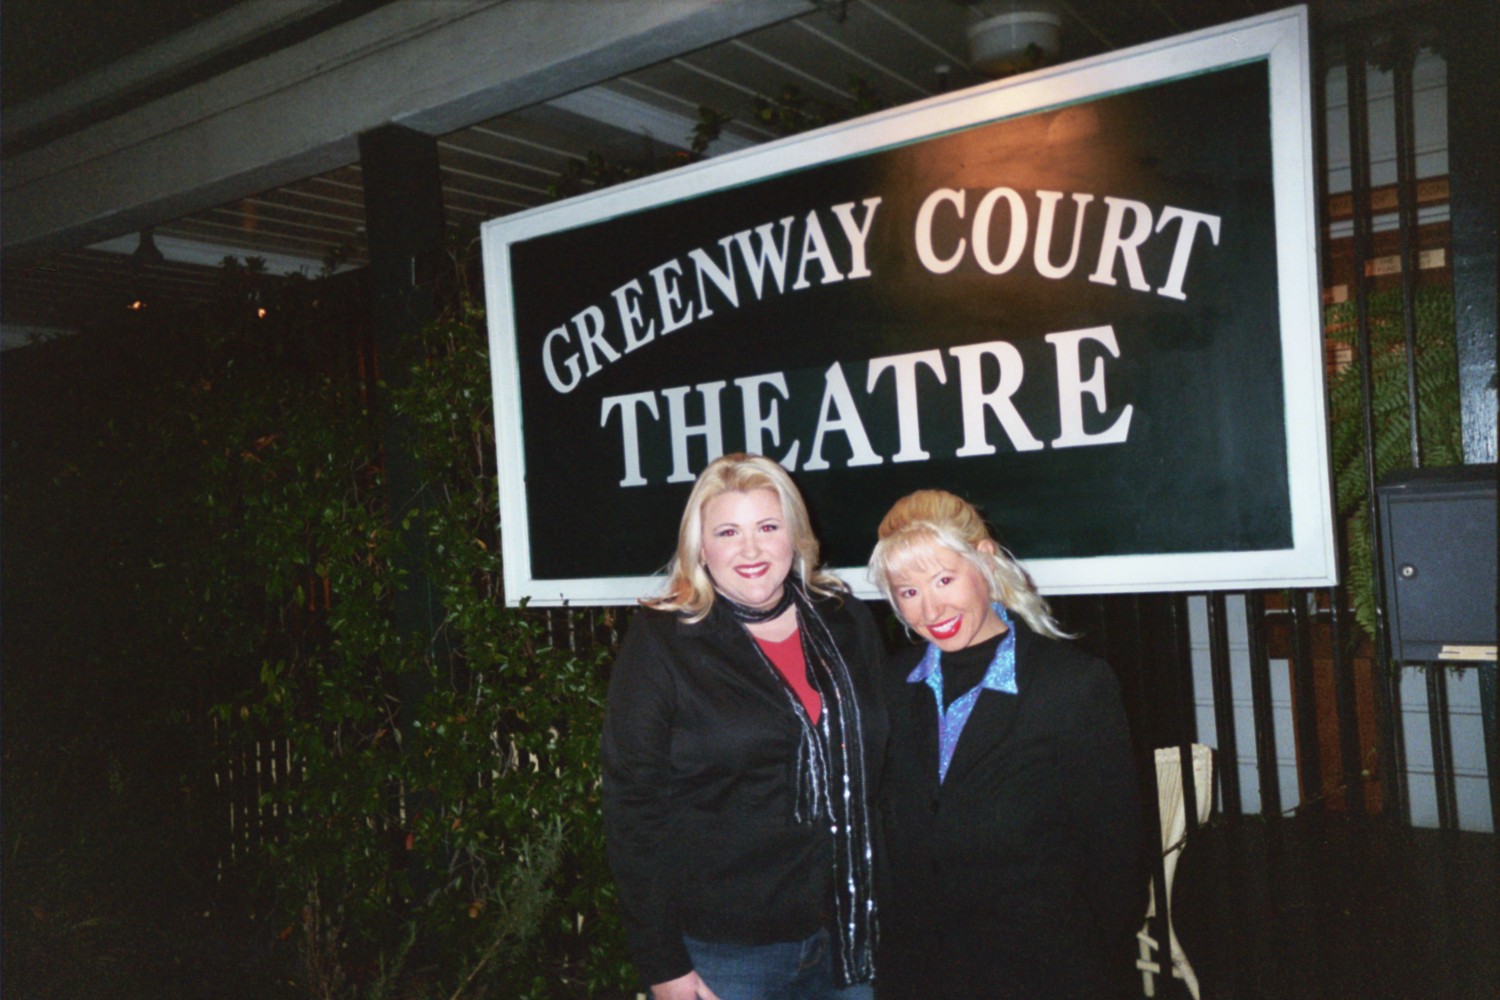 Andrea Calabrese with Meghan Mason; Greenway Court Theatre Open Mic 2004